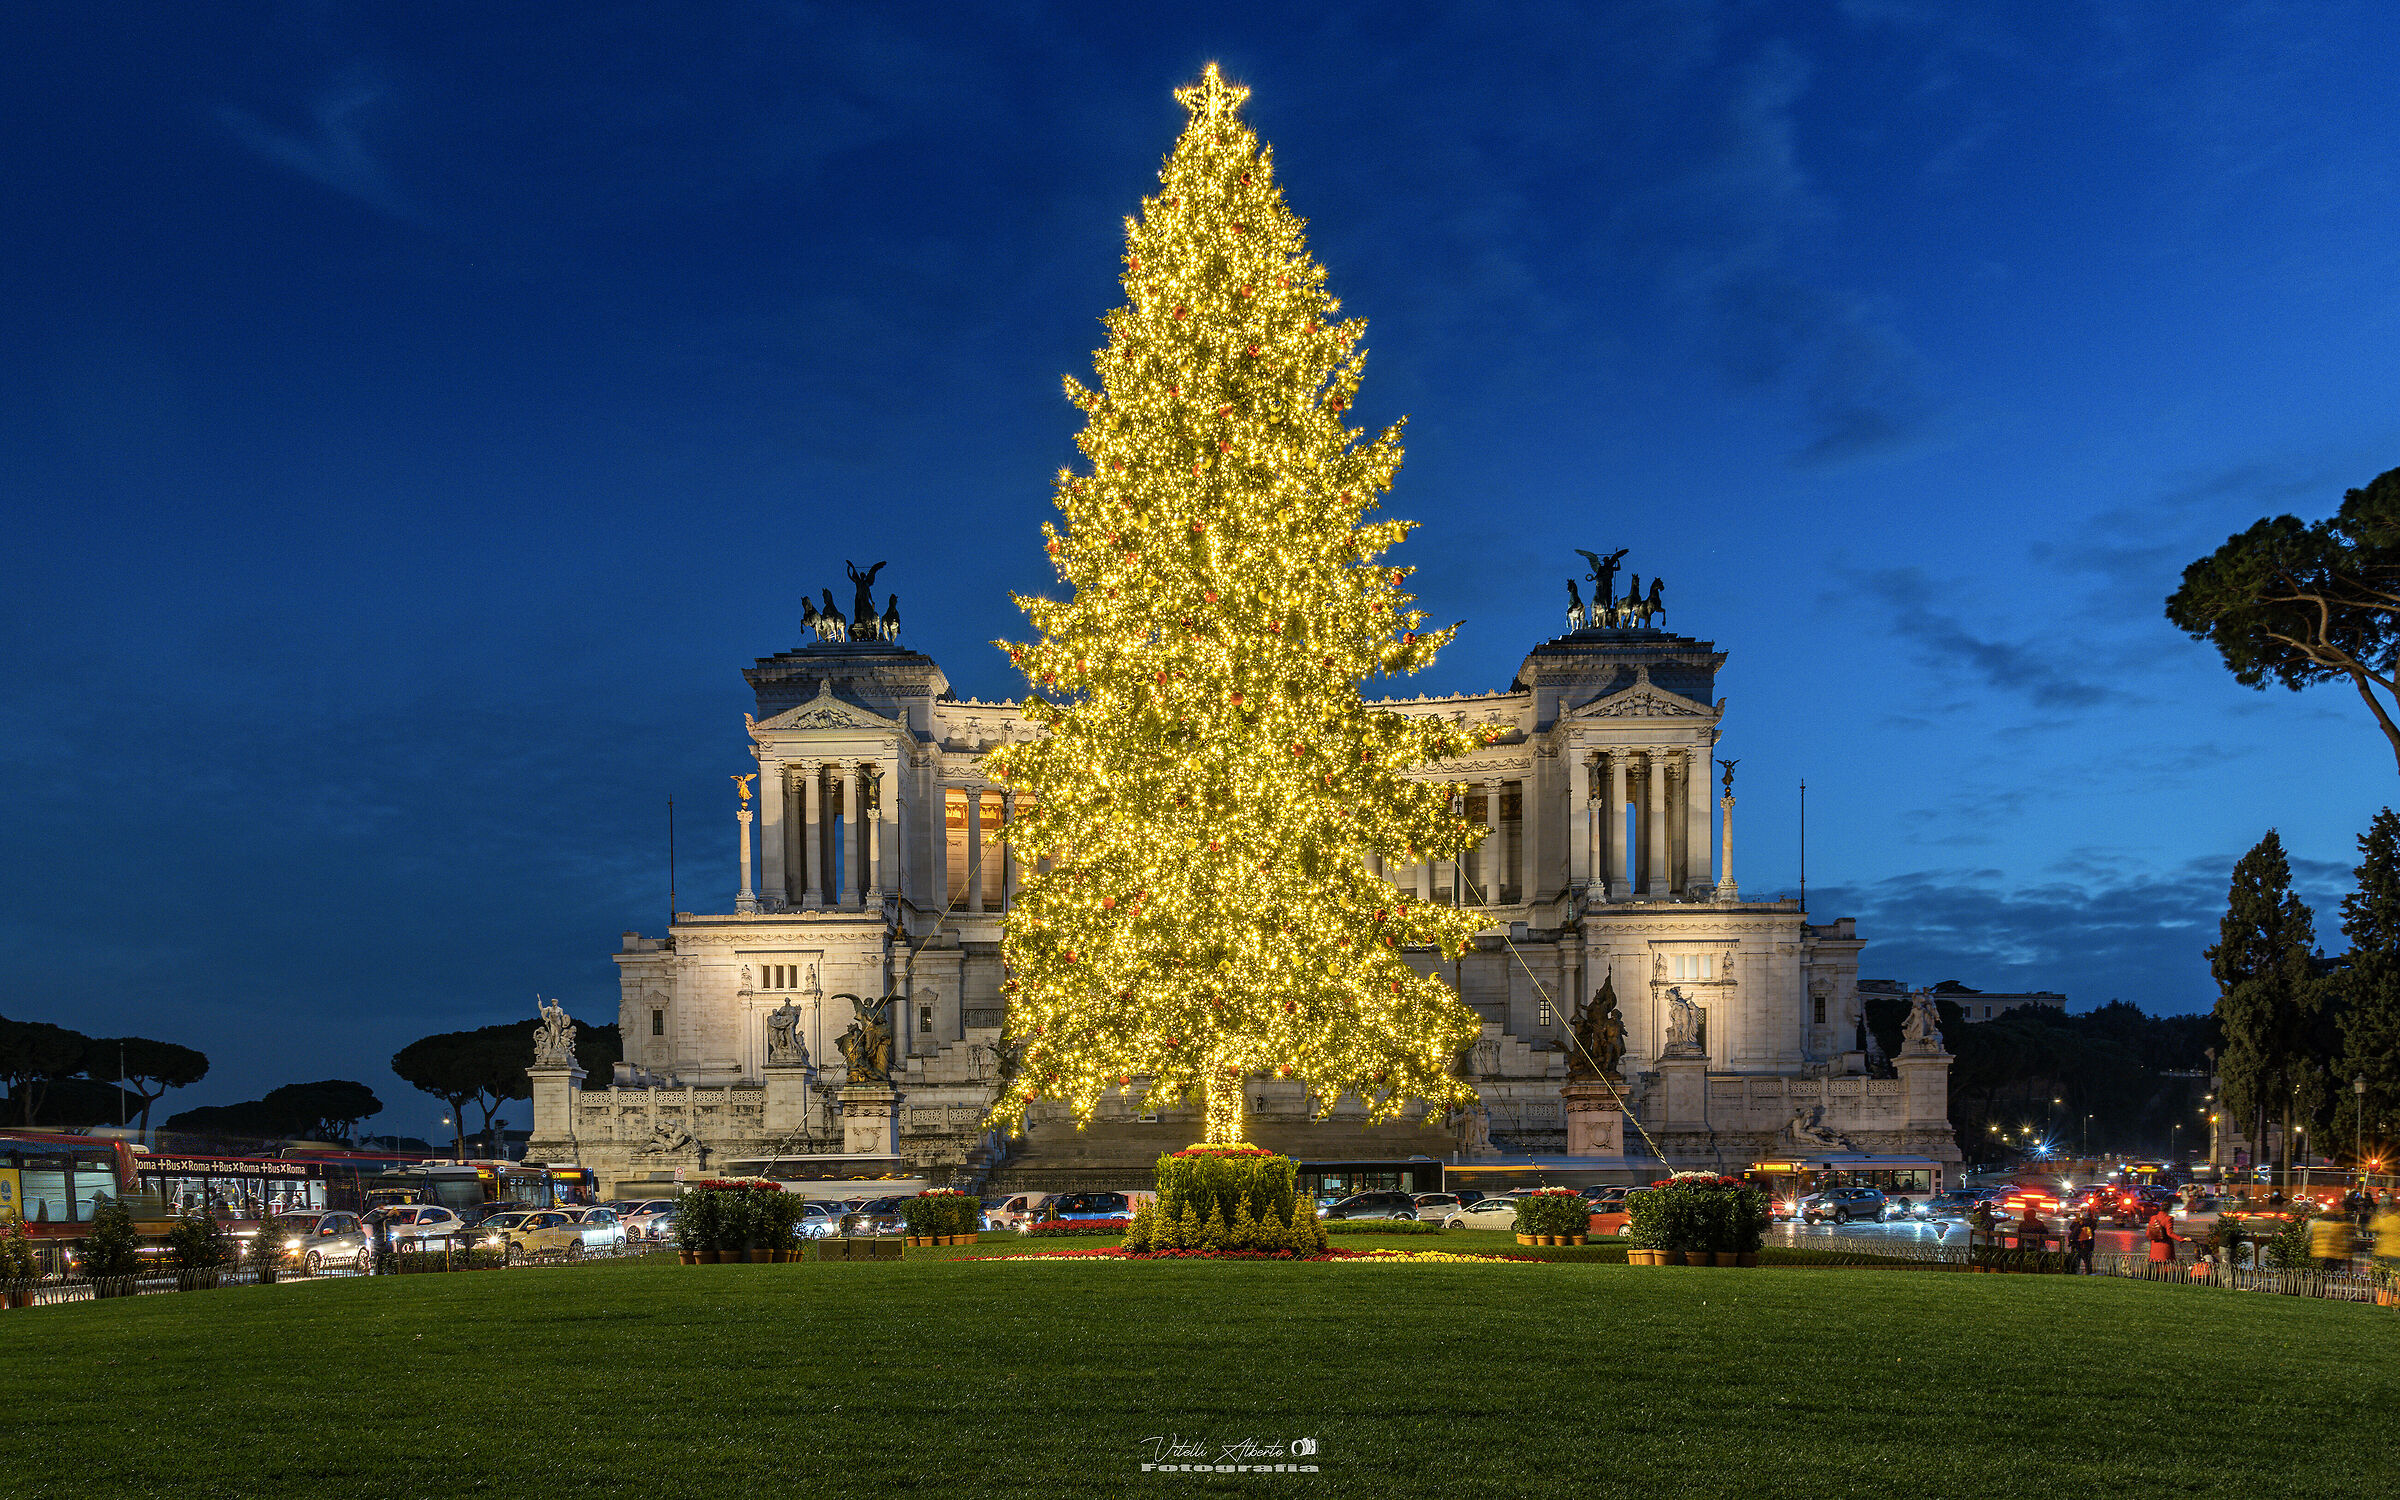 The Christmas Tree in Rome......